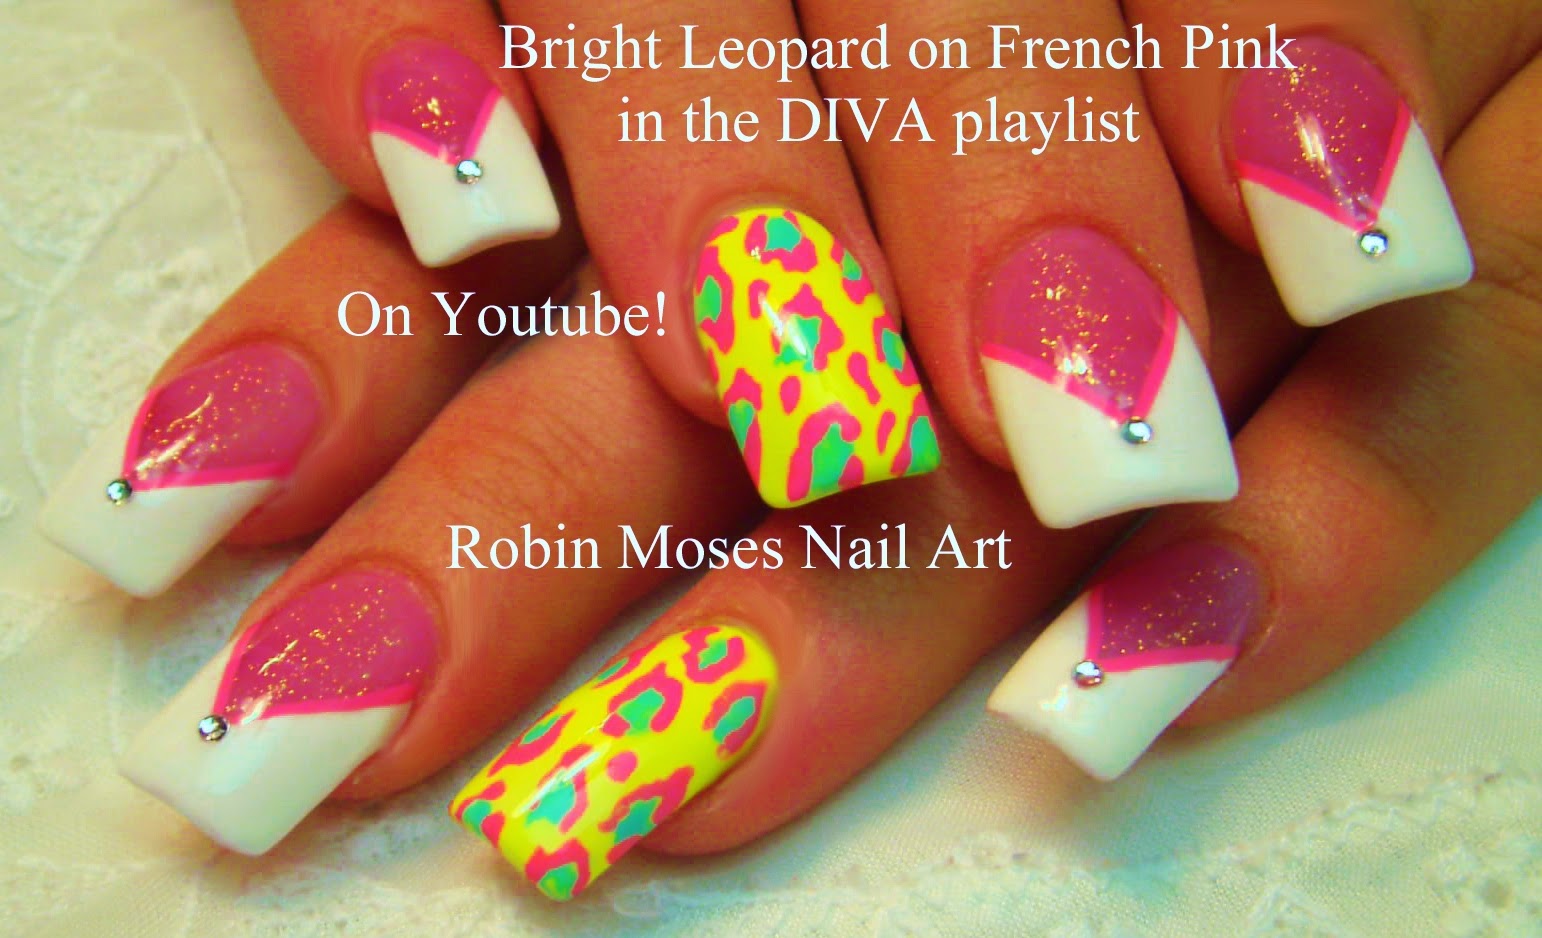 Robin Moses Nail Art - French Pink and White Nails Design - wide 7